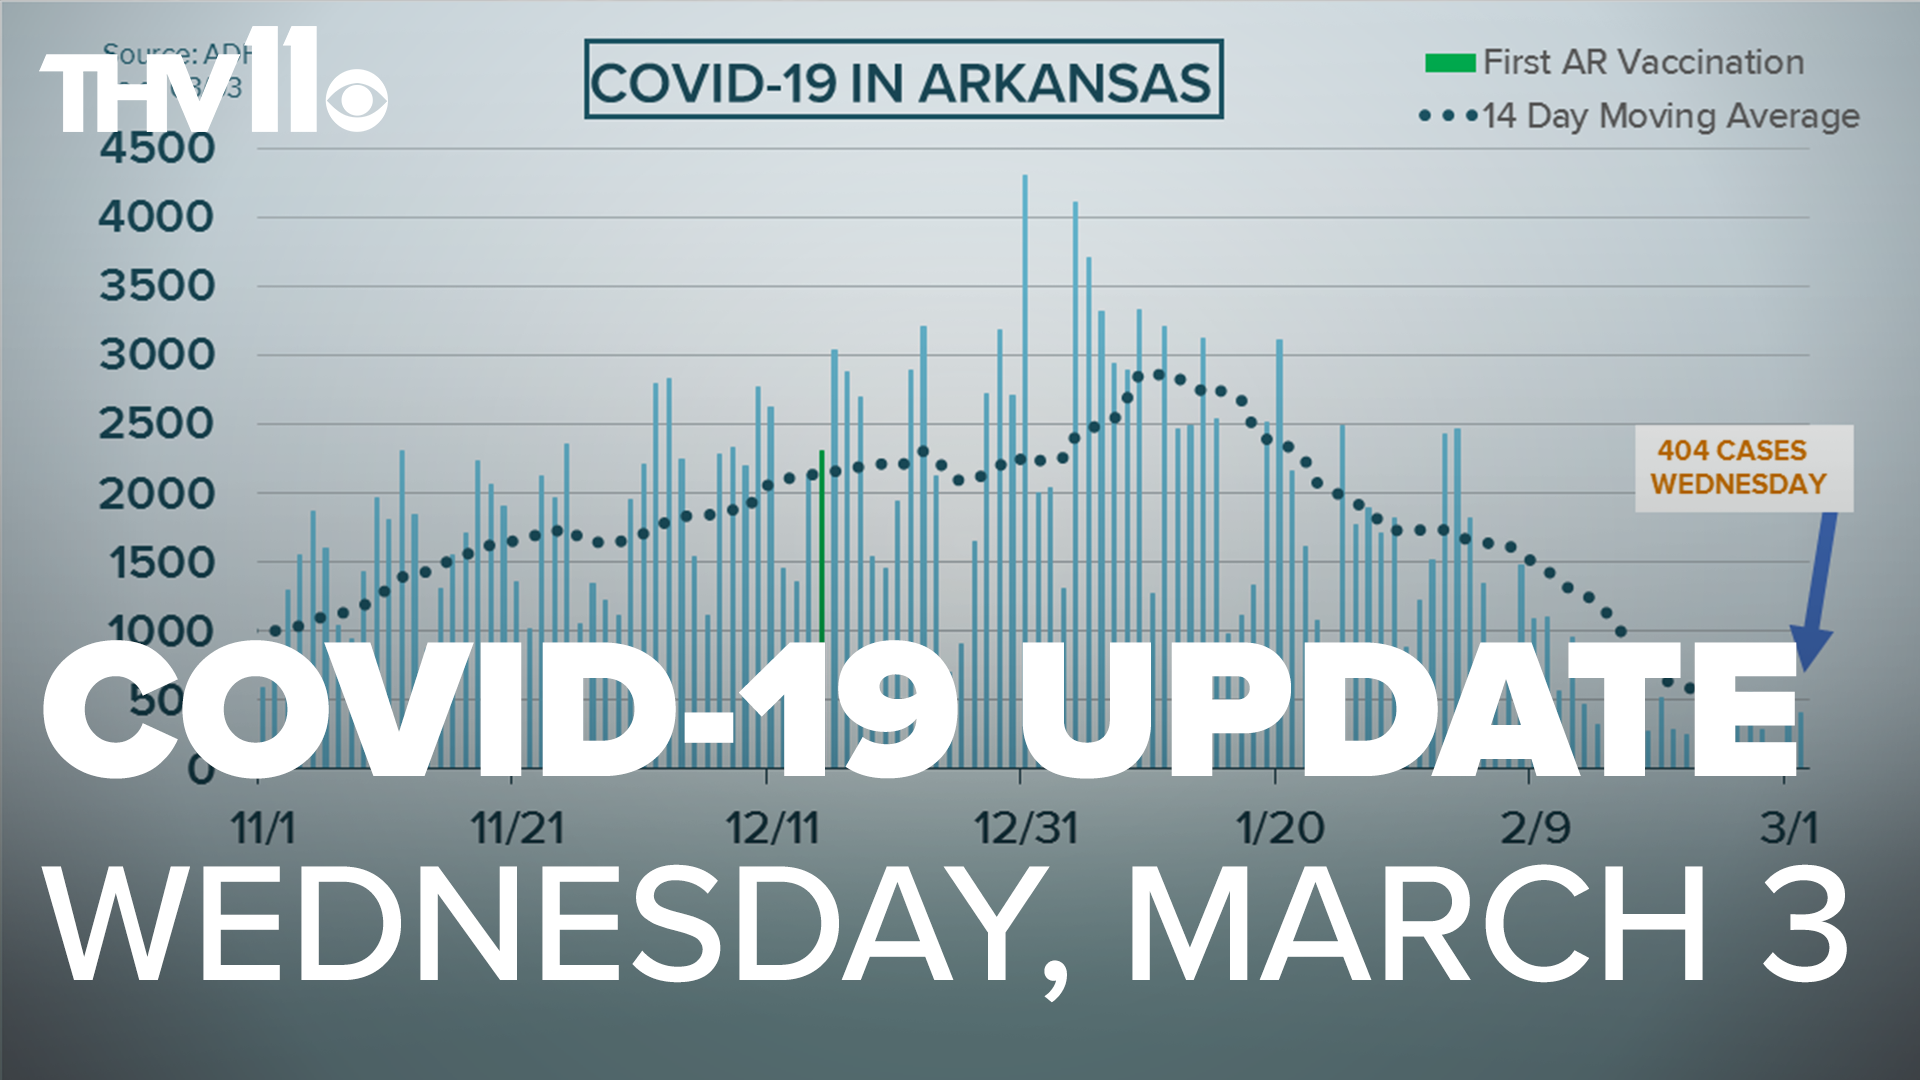 Rolly Hoyt provides an update on the coronavirus in Arkansas for Wednesday, March 3.